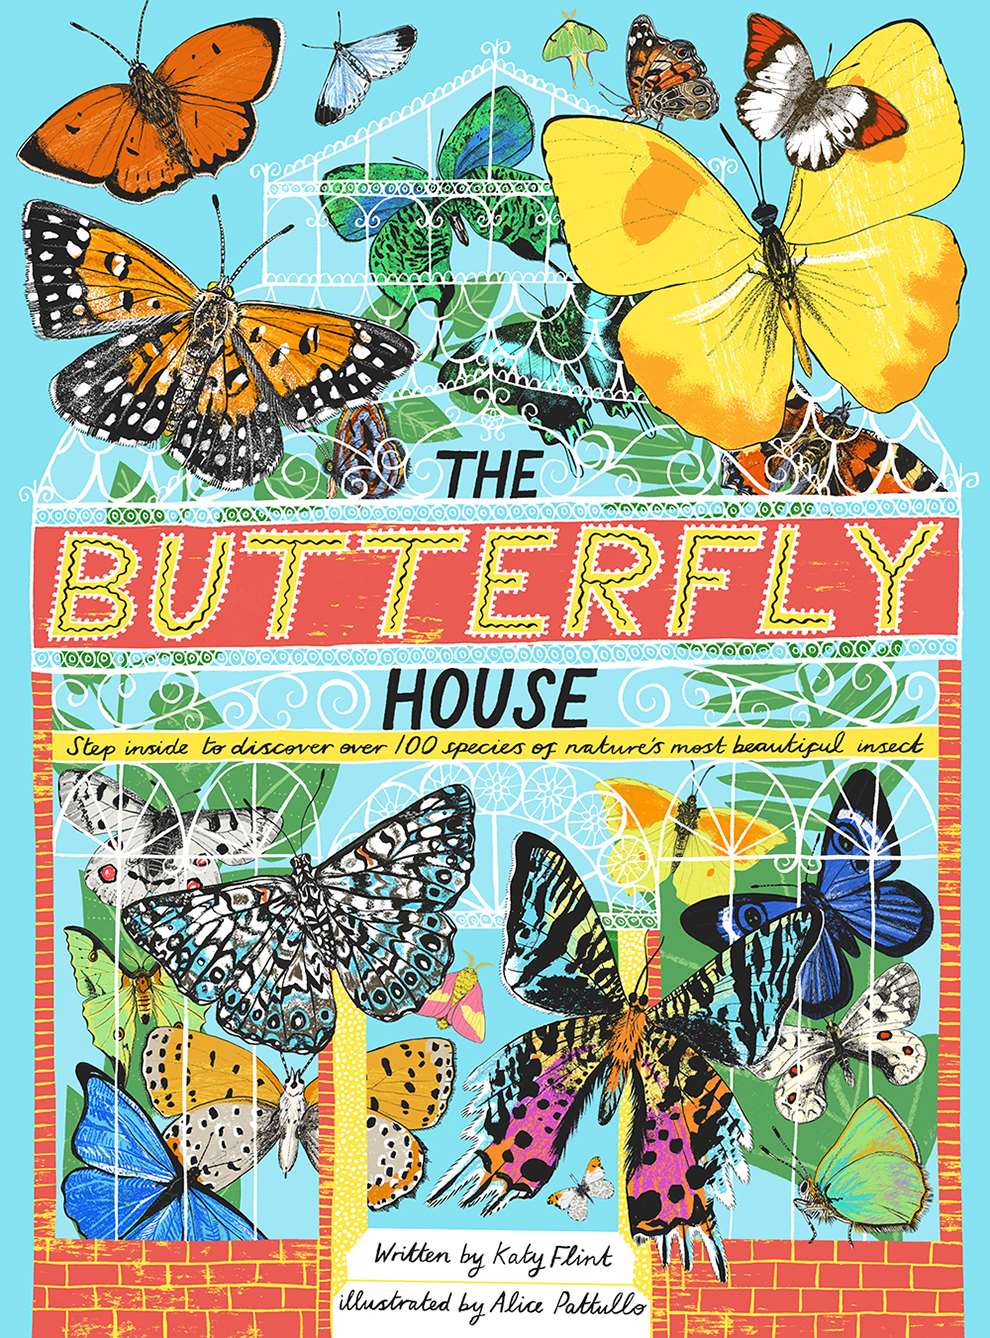 Alice Pattullo, Alice Pattullo decorative book cover illustration of butterflies, with botanical elements throughout.  